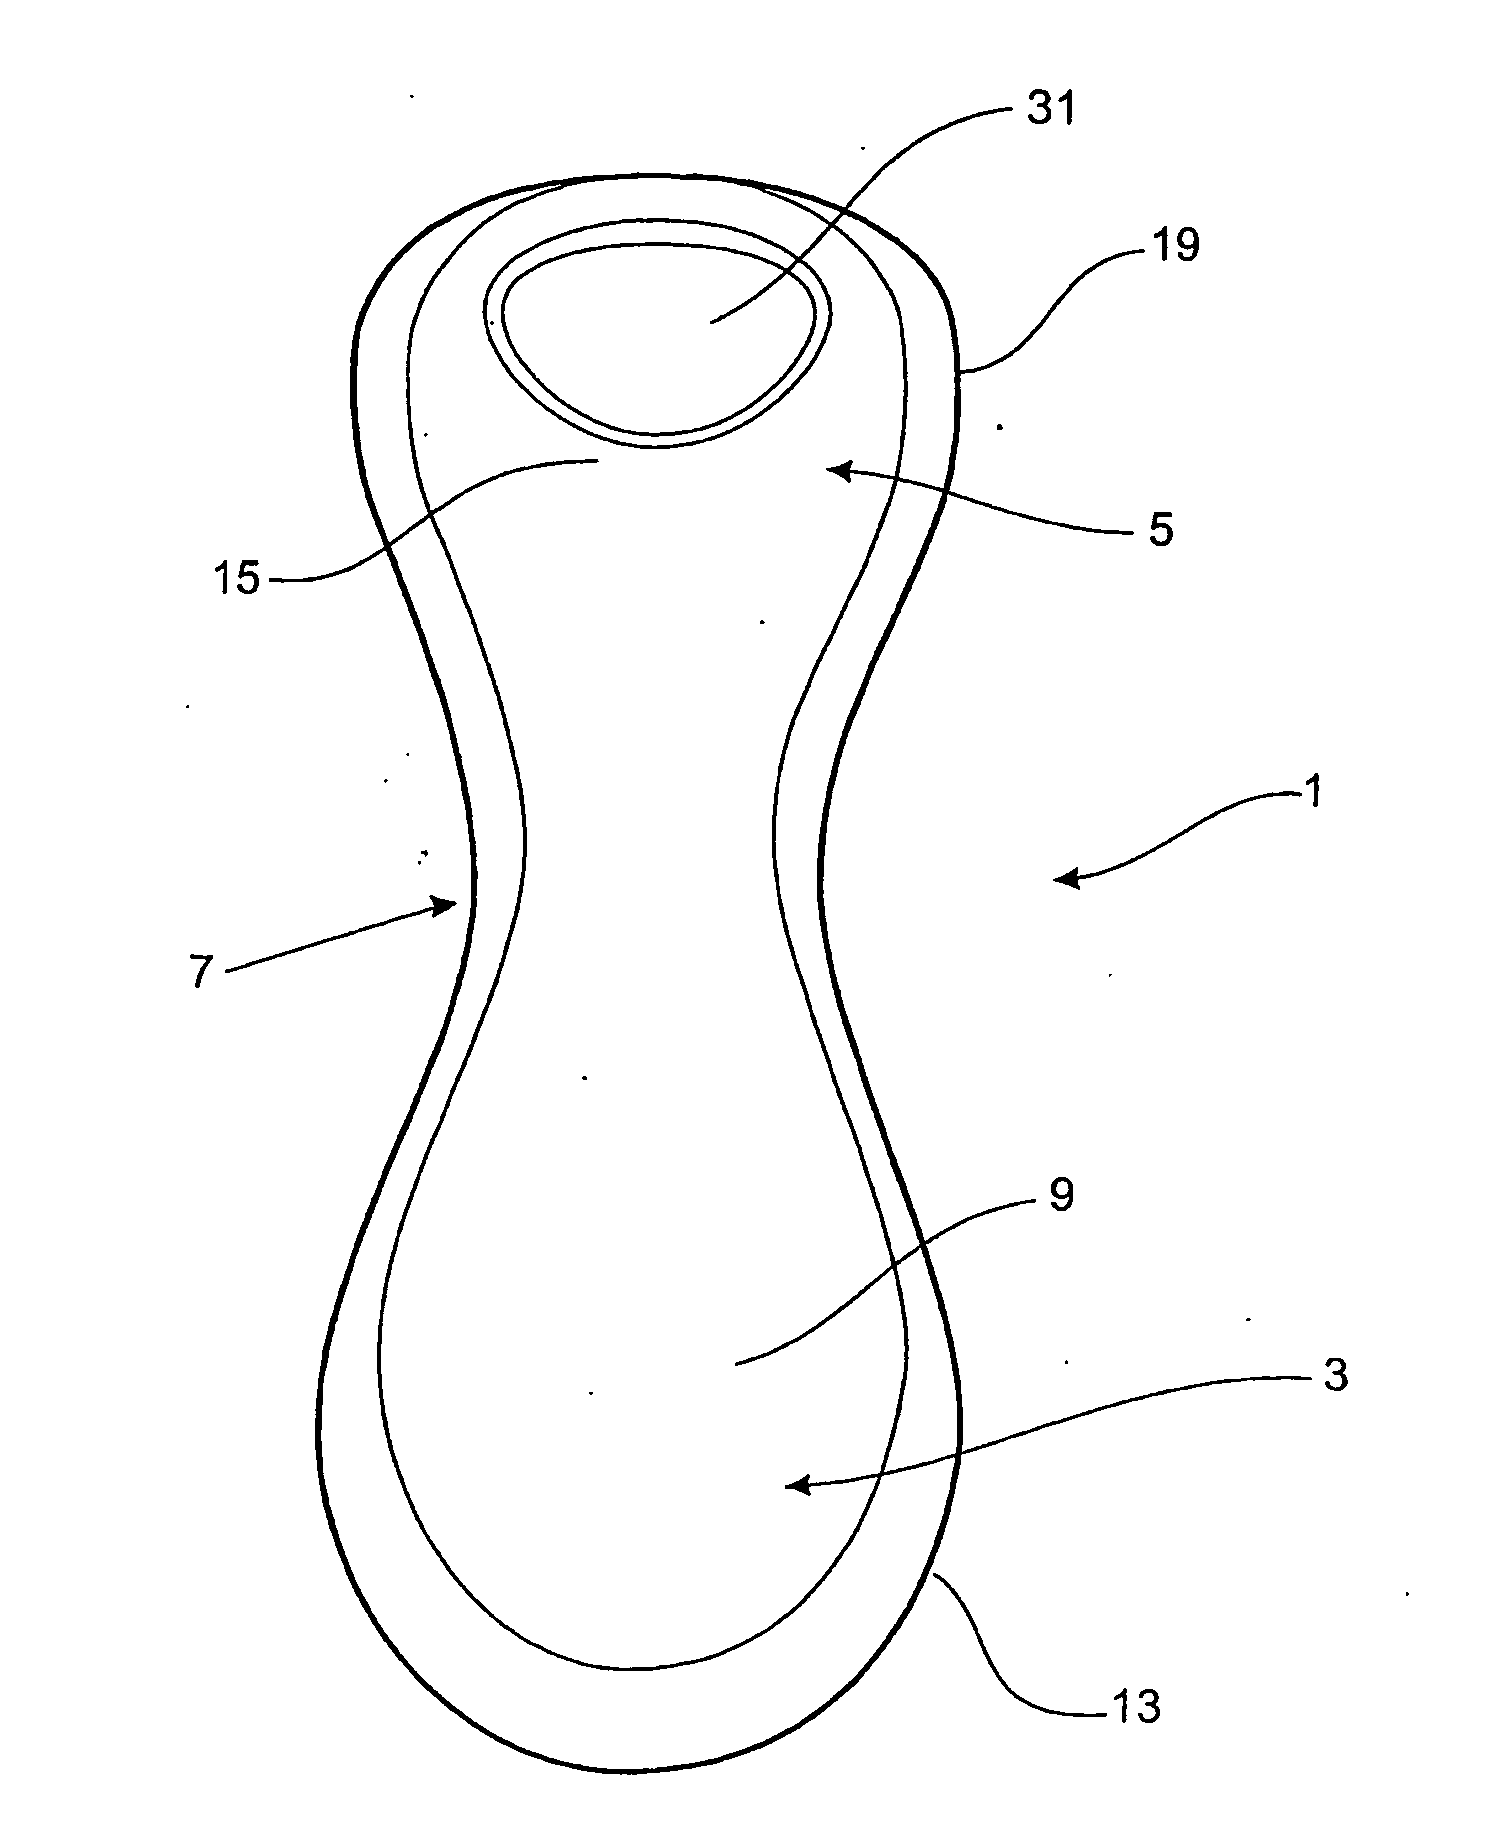 Device for exercising or supporting the pelvic floor muscles